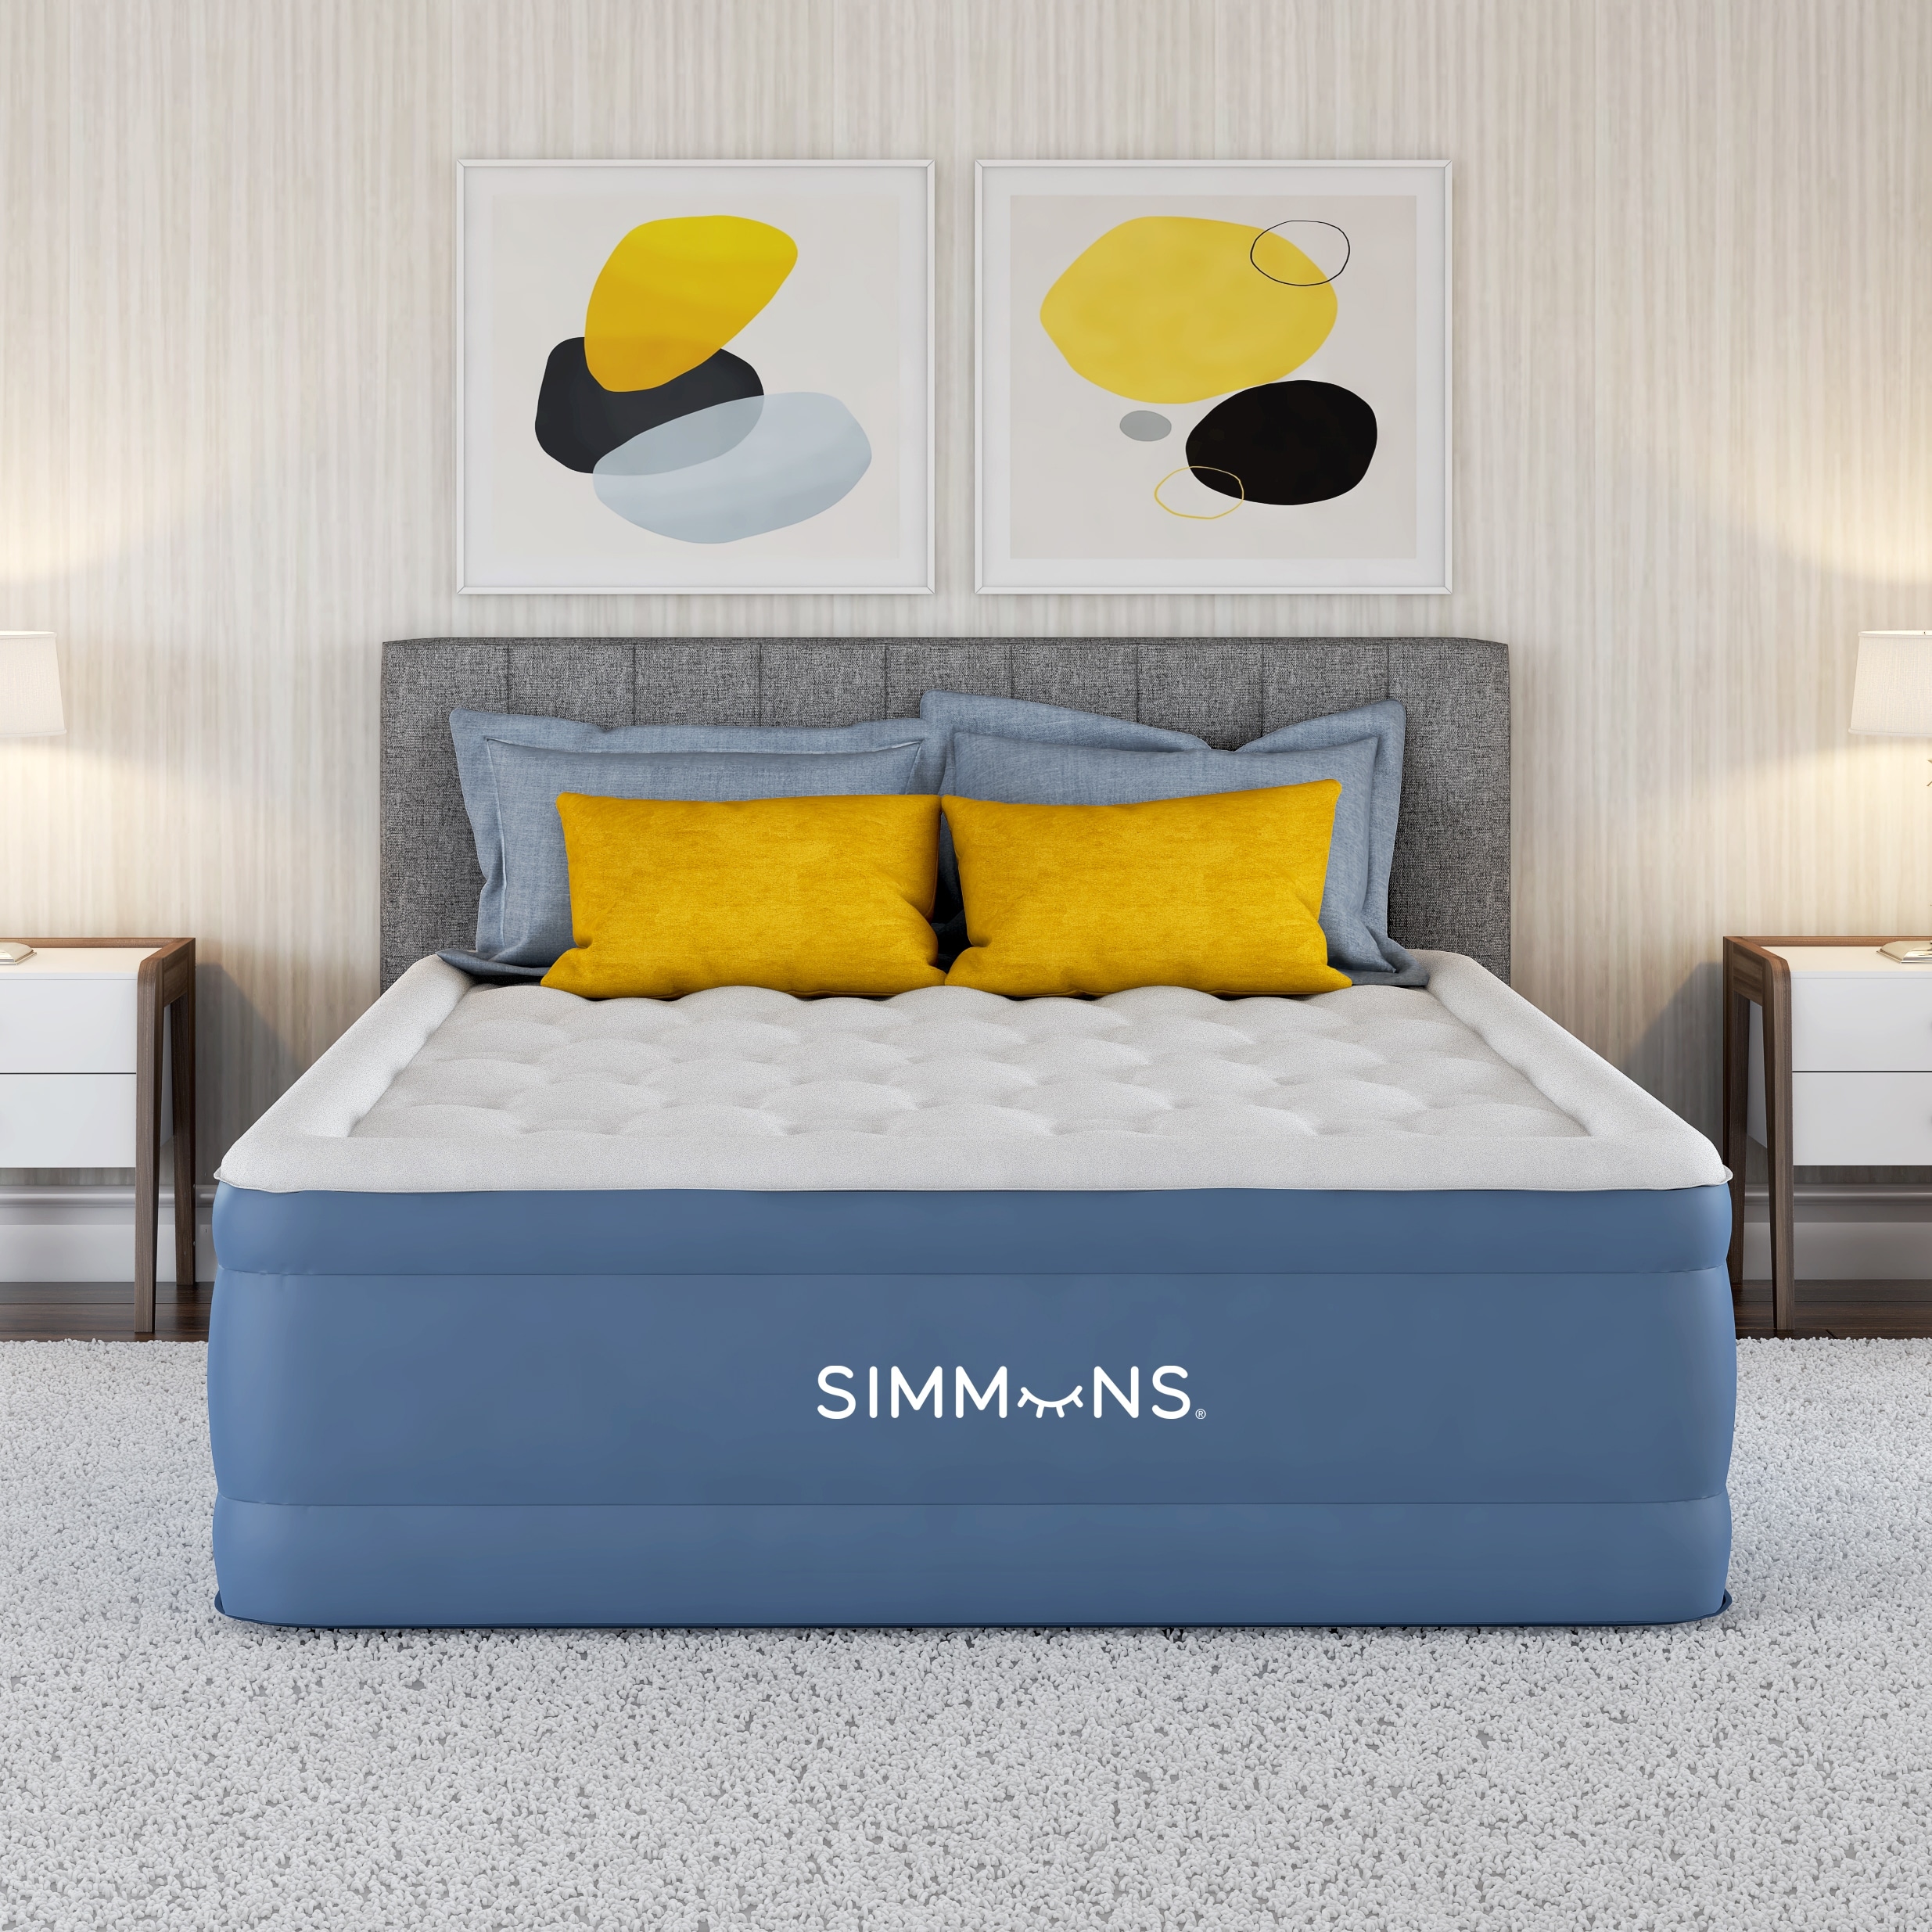 https://ak1.ostkcdn.com/images/products/is/images/direct/3adec673d7d6def4fc1fcaac623c24108eee0496/Simmons-Rest-Aire-Raised-Air-Mattress-with-Inset-Pump.jpg